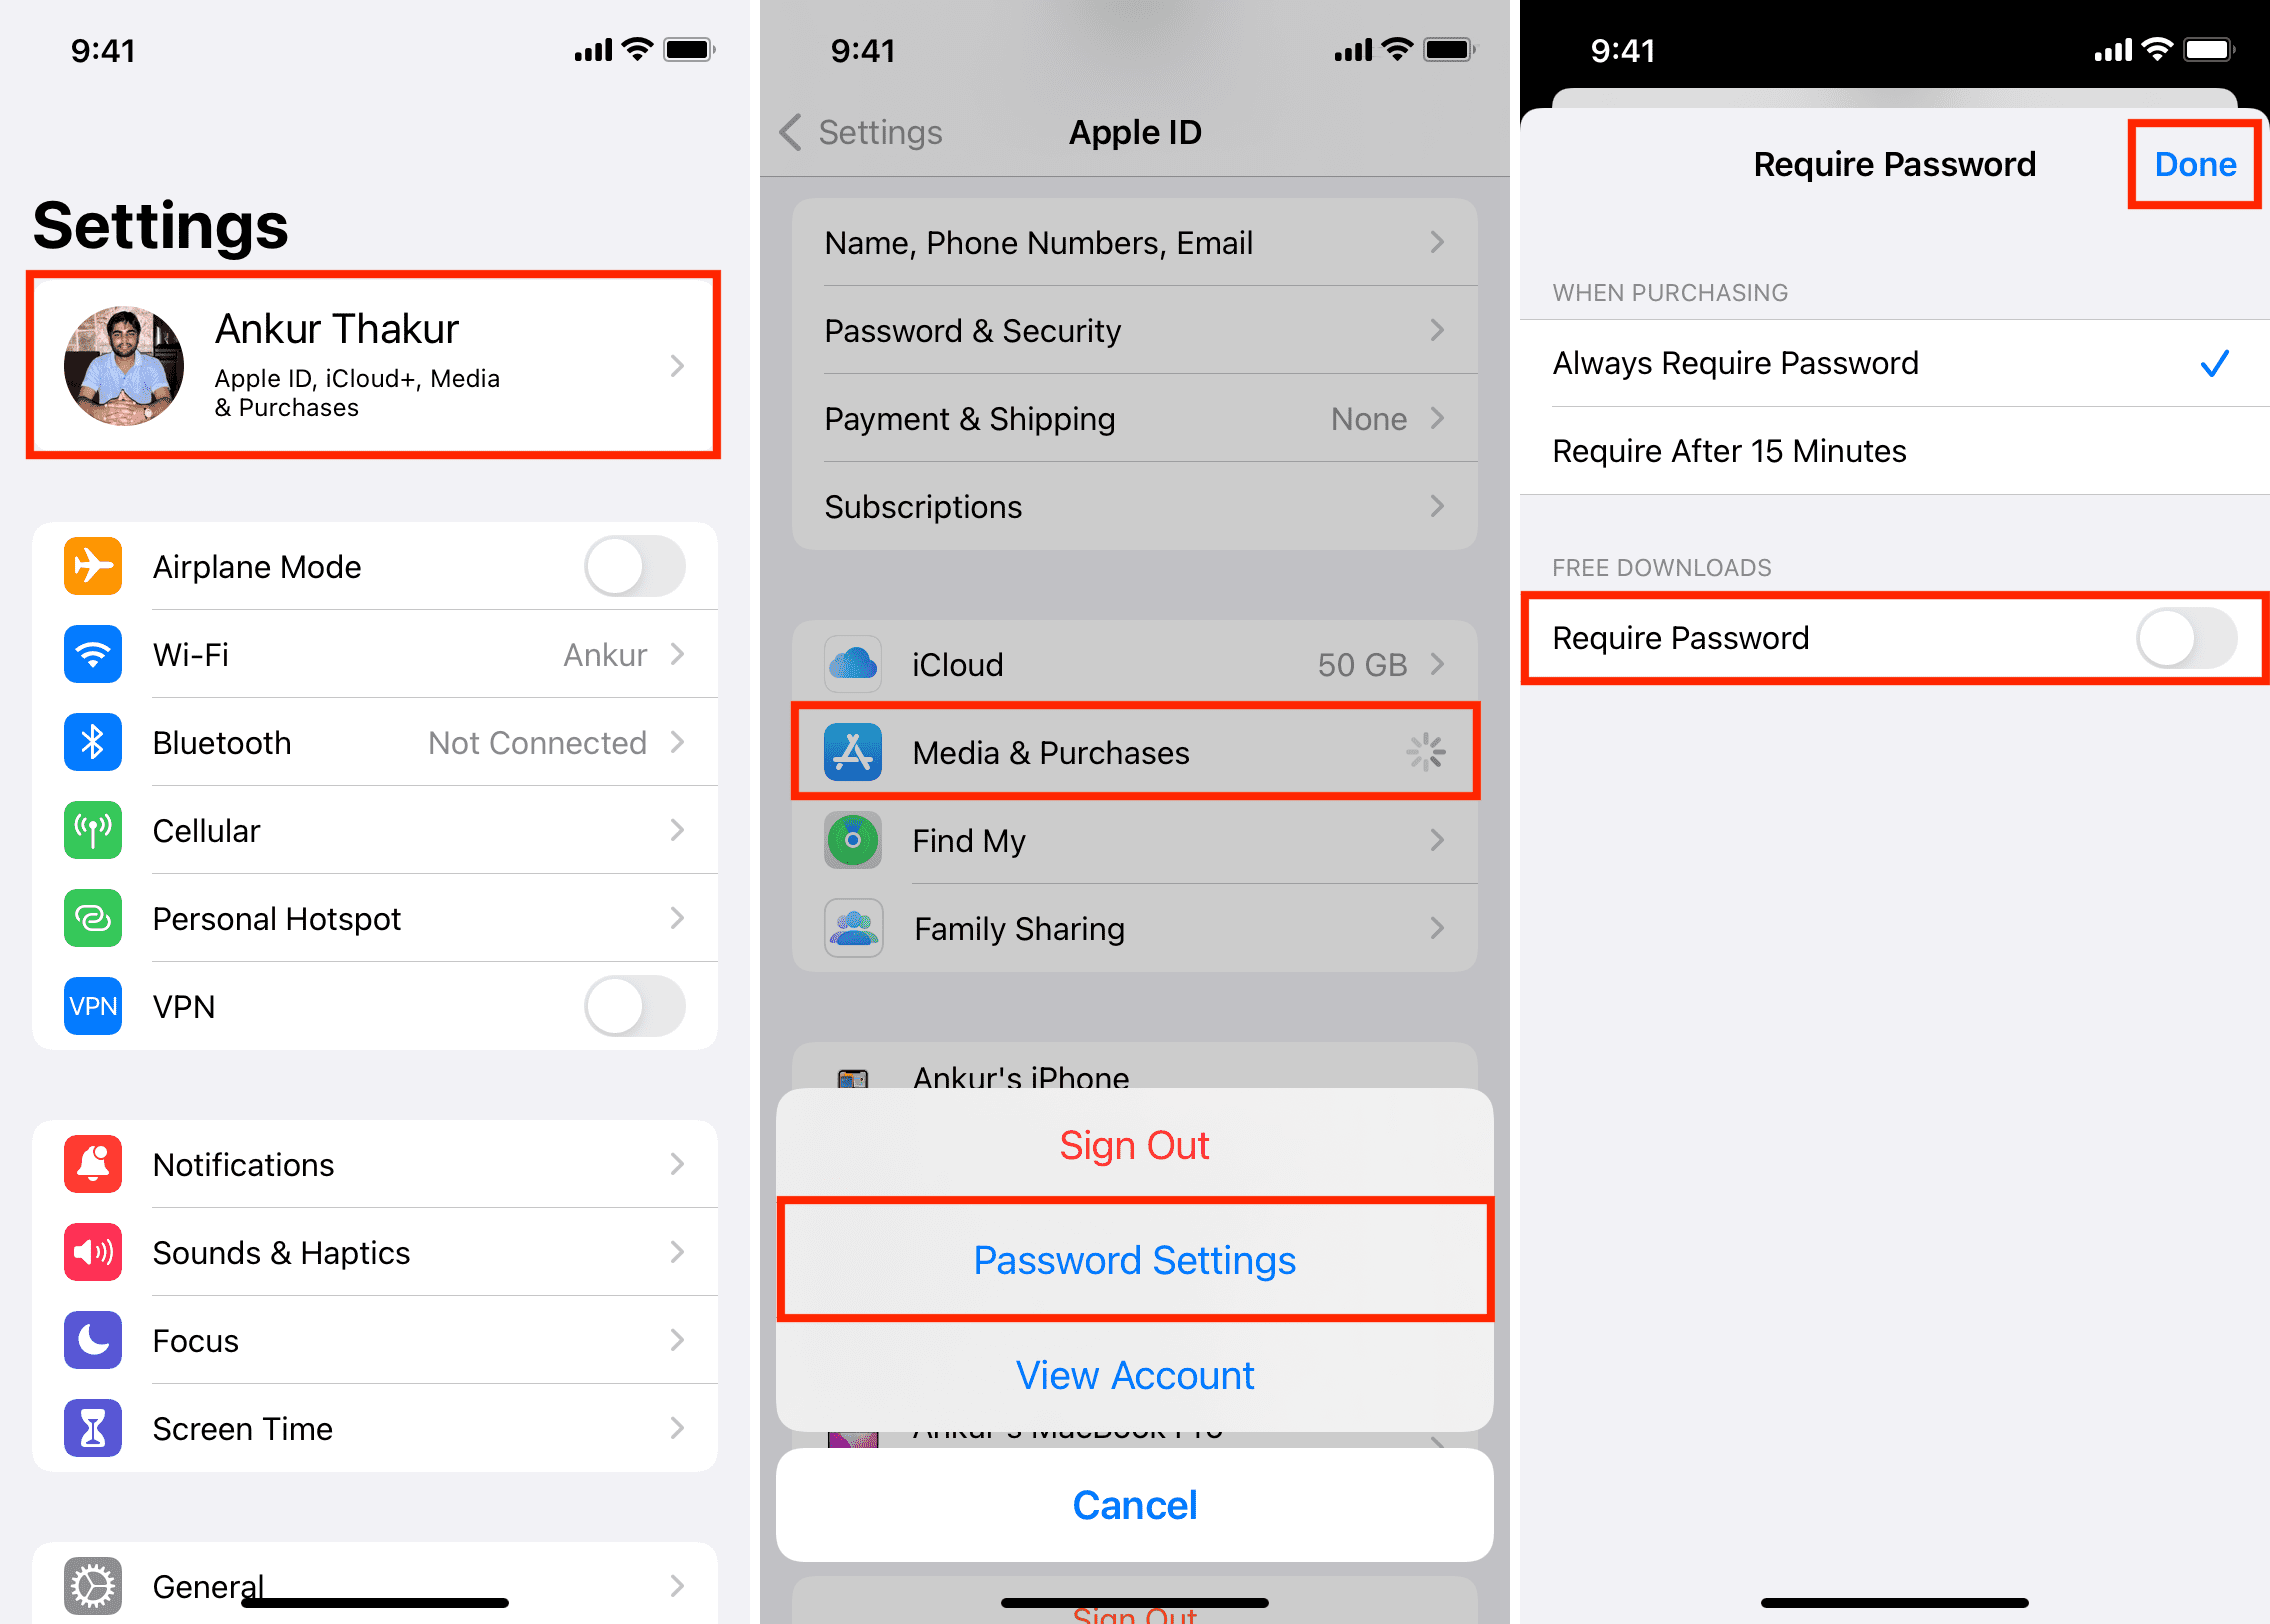 How to download apps on iPhone without Apple ID password, Face ID, or Touch ID authentication